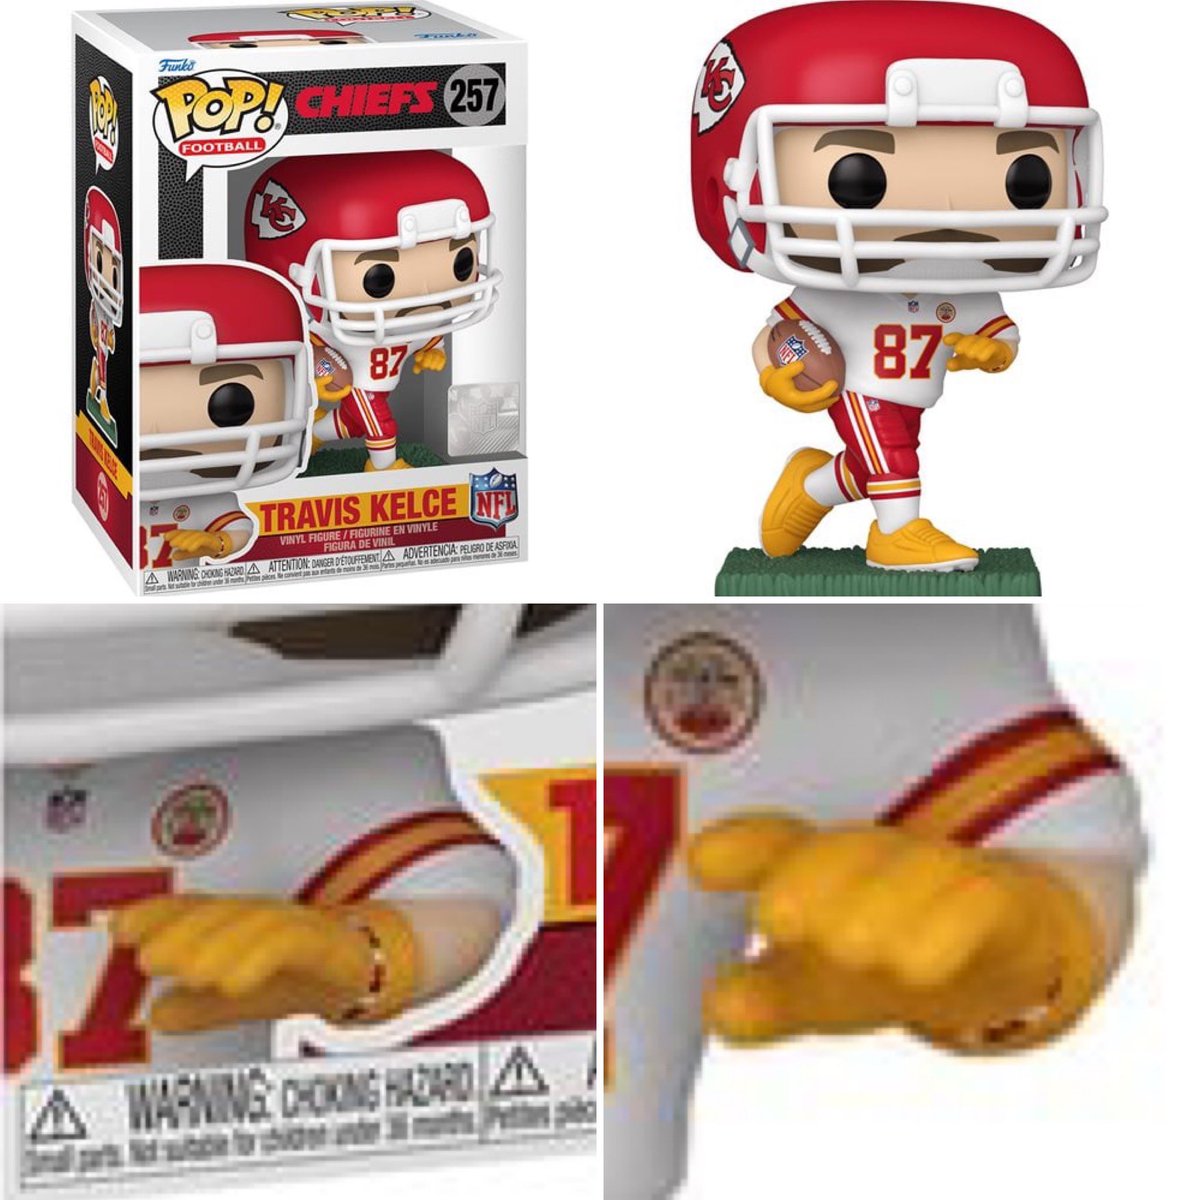 Taylor Swift fans. Friendship bracelet or not? Many of you have been pointing out this small detail on the new Travis Kelce Funko POP! Available below ~
Linky ~ fnkpp.com/EE
#Ad #TaylorSwift #TravisKelce #FPN #FunkoPOPNews #Funko #POP #POPVinyl #FunkoPOP #FunkoSoda